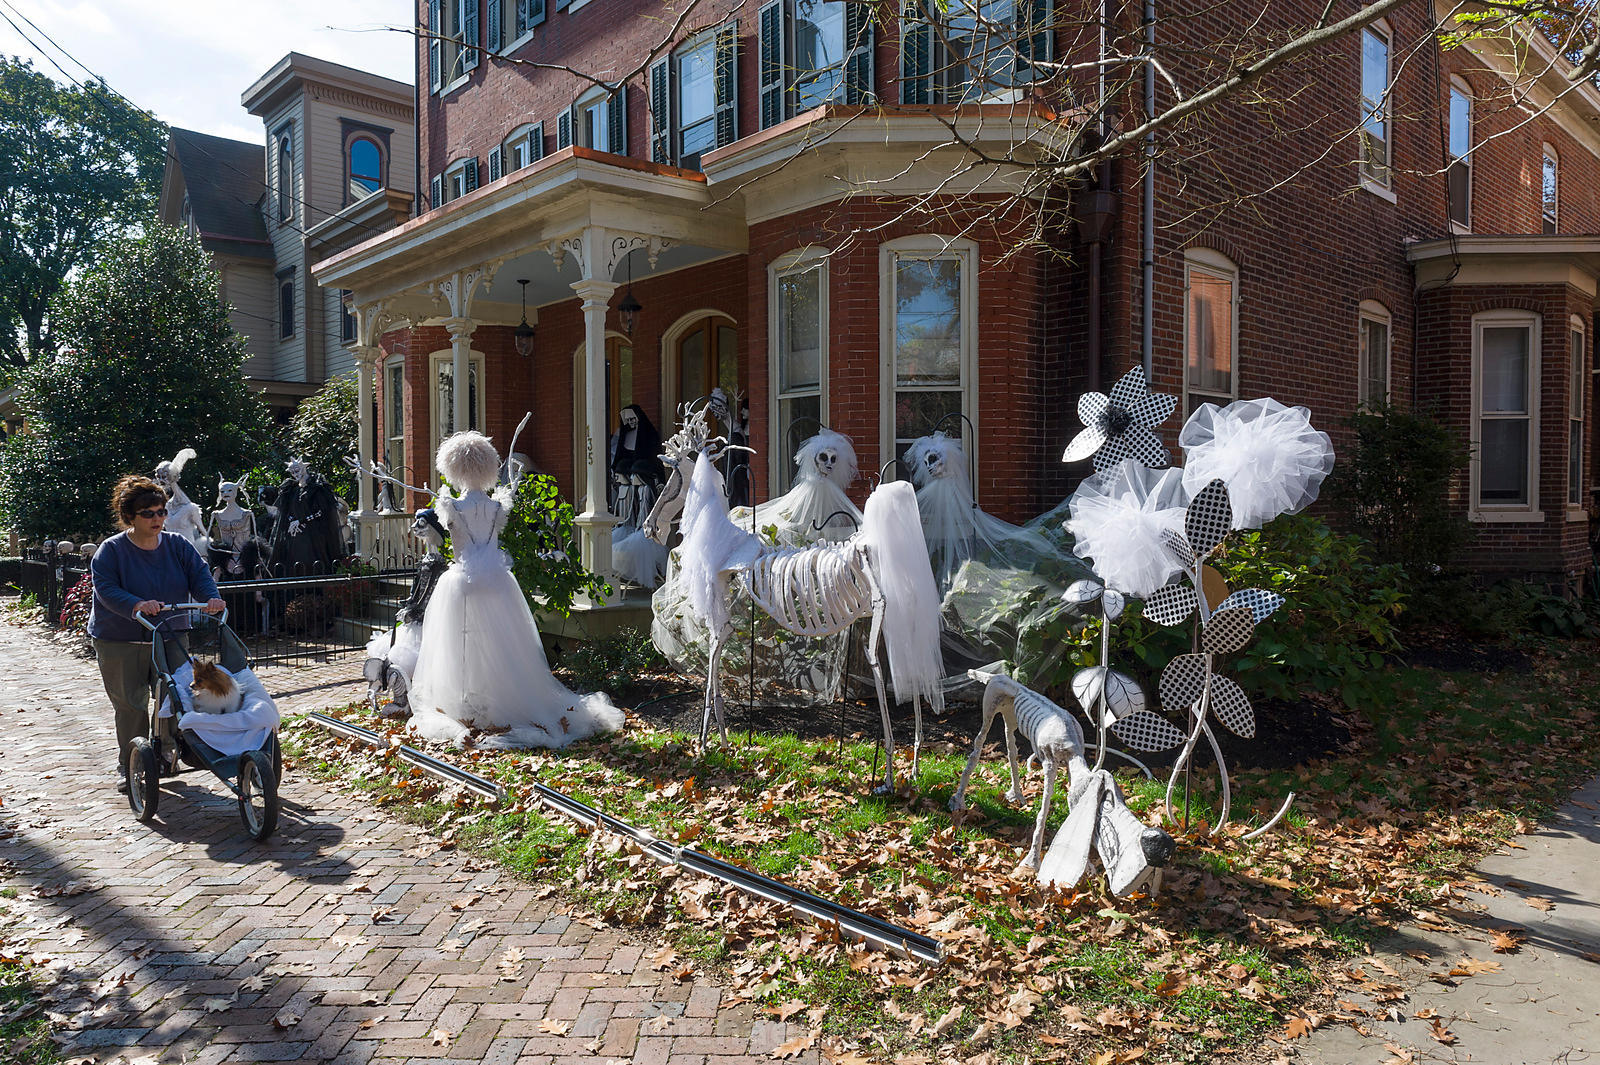 Halloween statues and decorations outside house in Lambertville, New Jersey